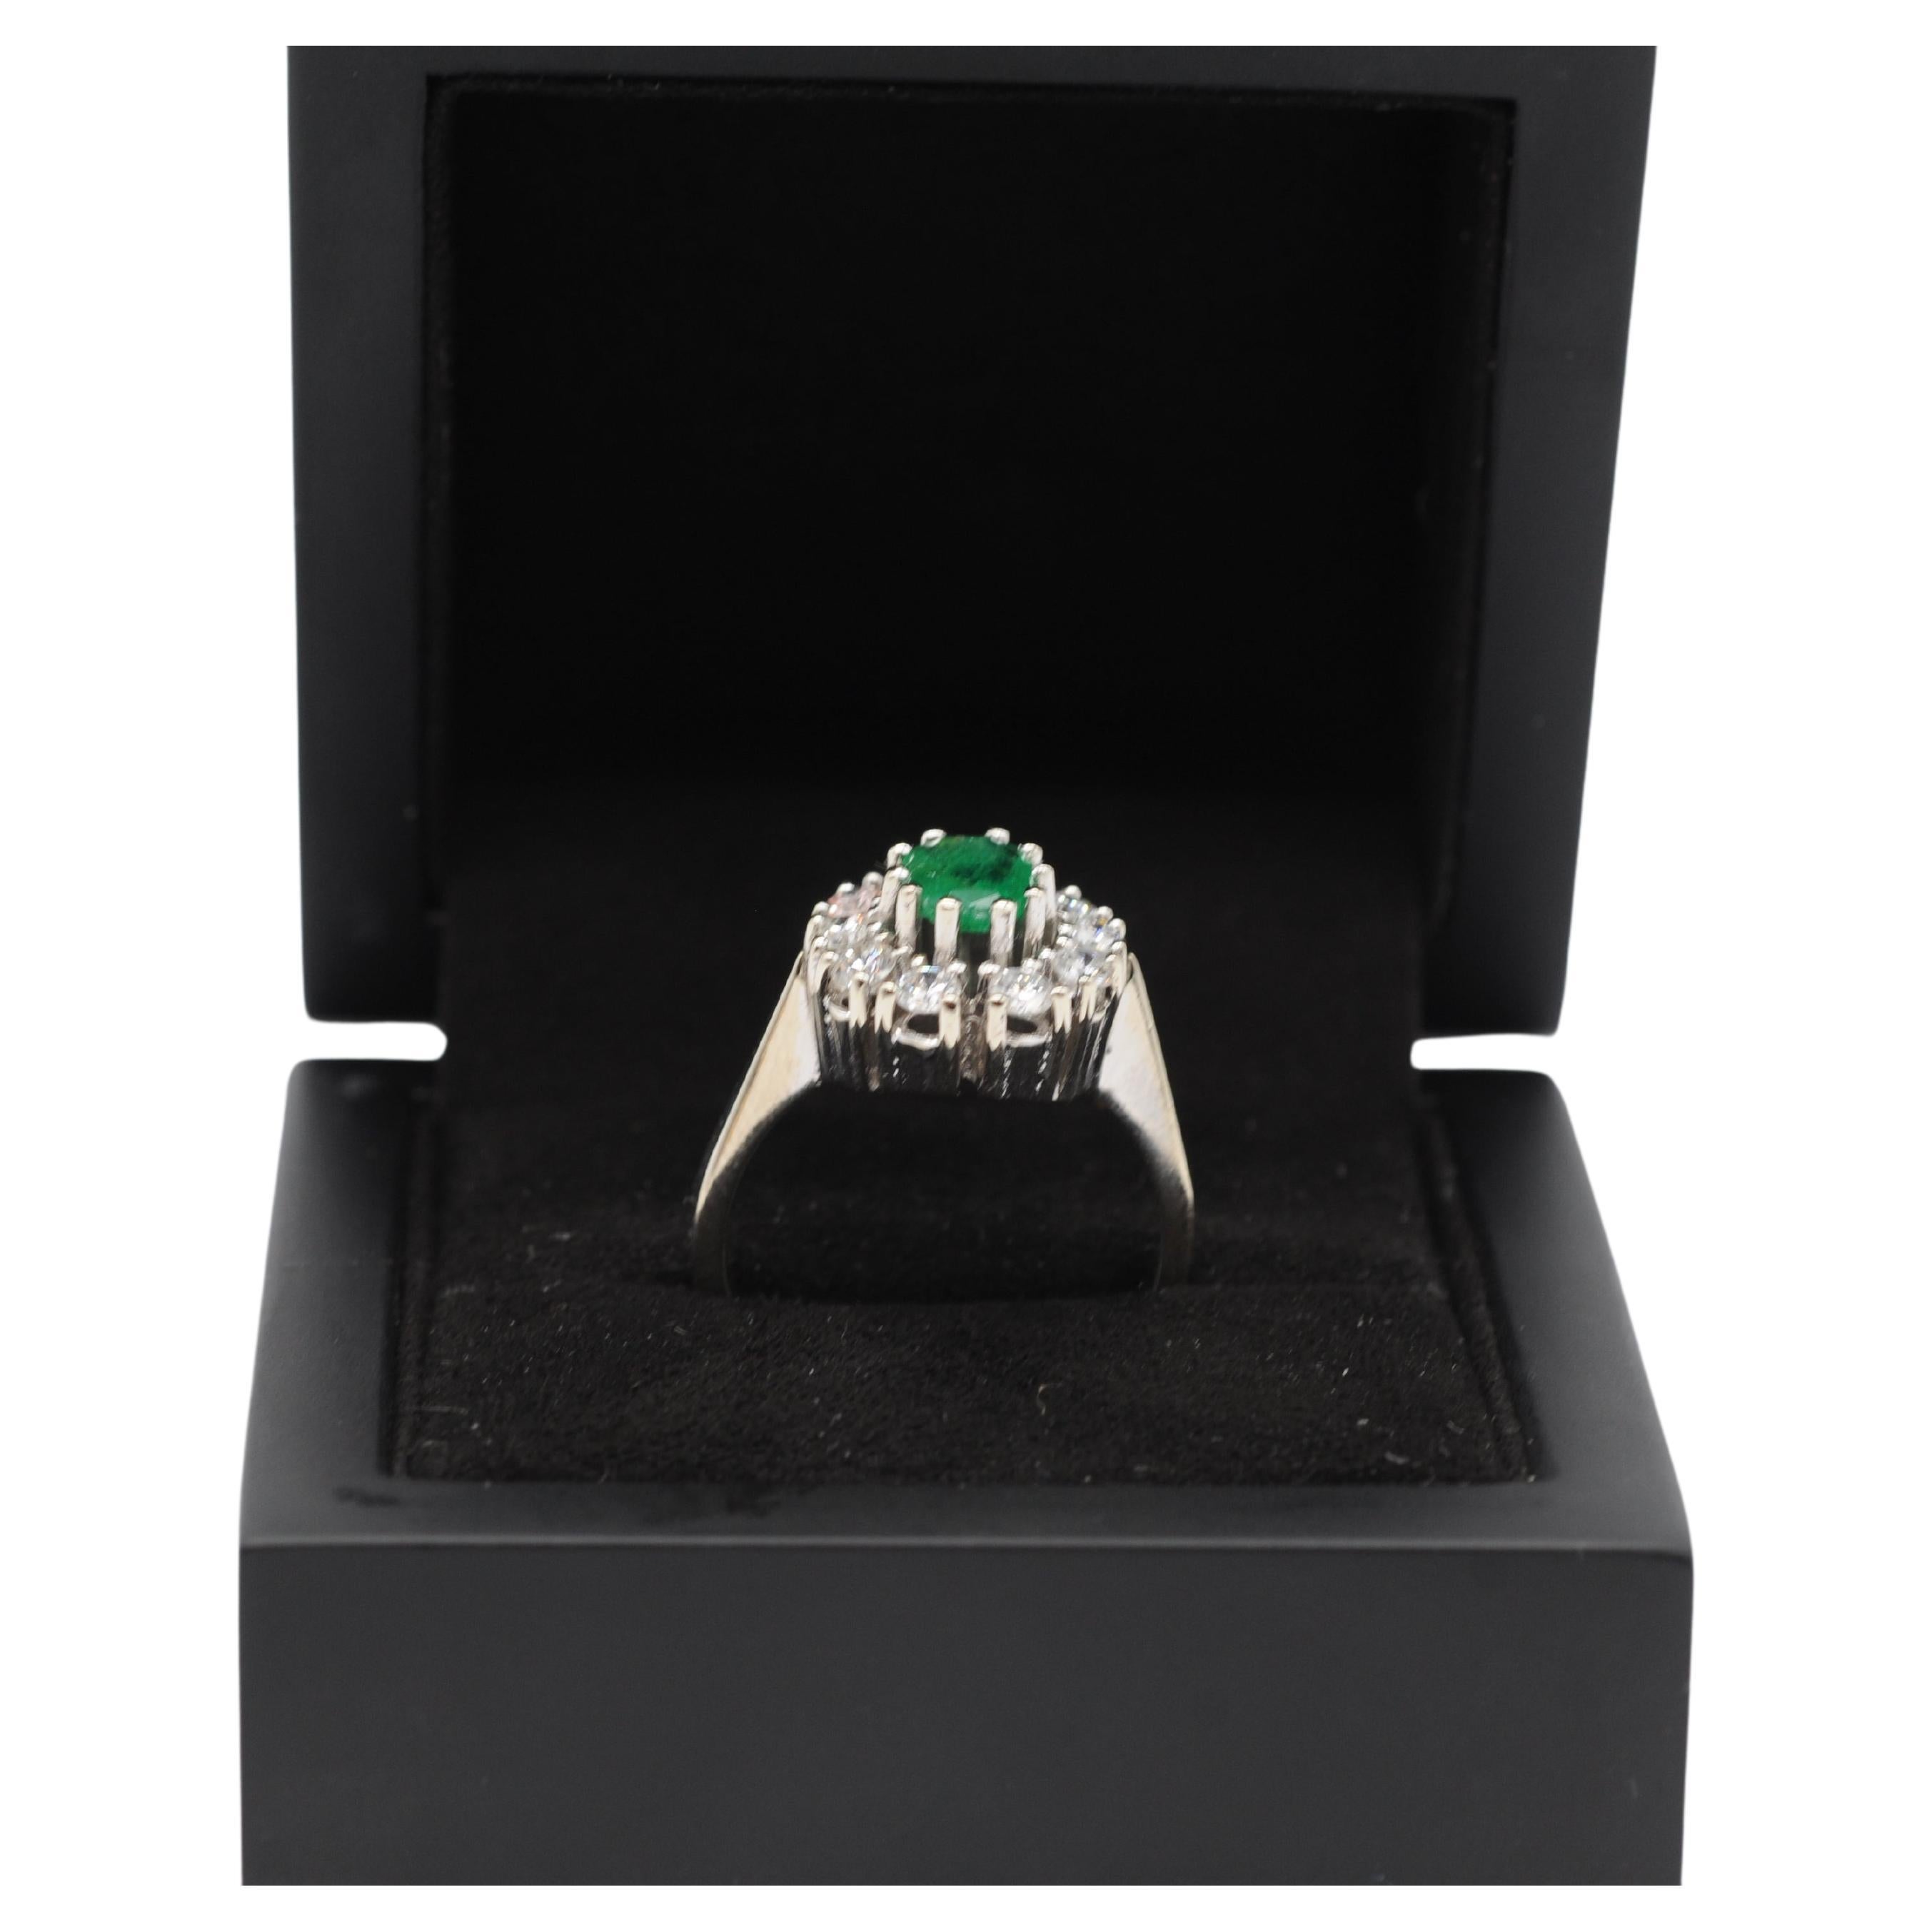 Presenting a breathtaking 14k white gold ring adorned with ten dazzling diamonds in brilliant cuts, accompanied by a stunning Colombian emerald with inclusions. The dimensions of the gemstones are as follows:

Emerald:Approximately Length: 7.5mm,